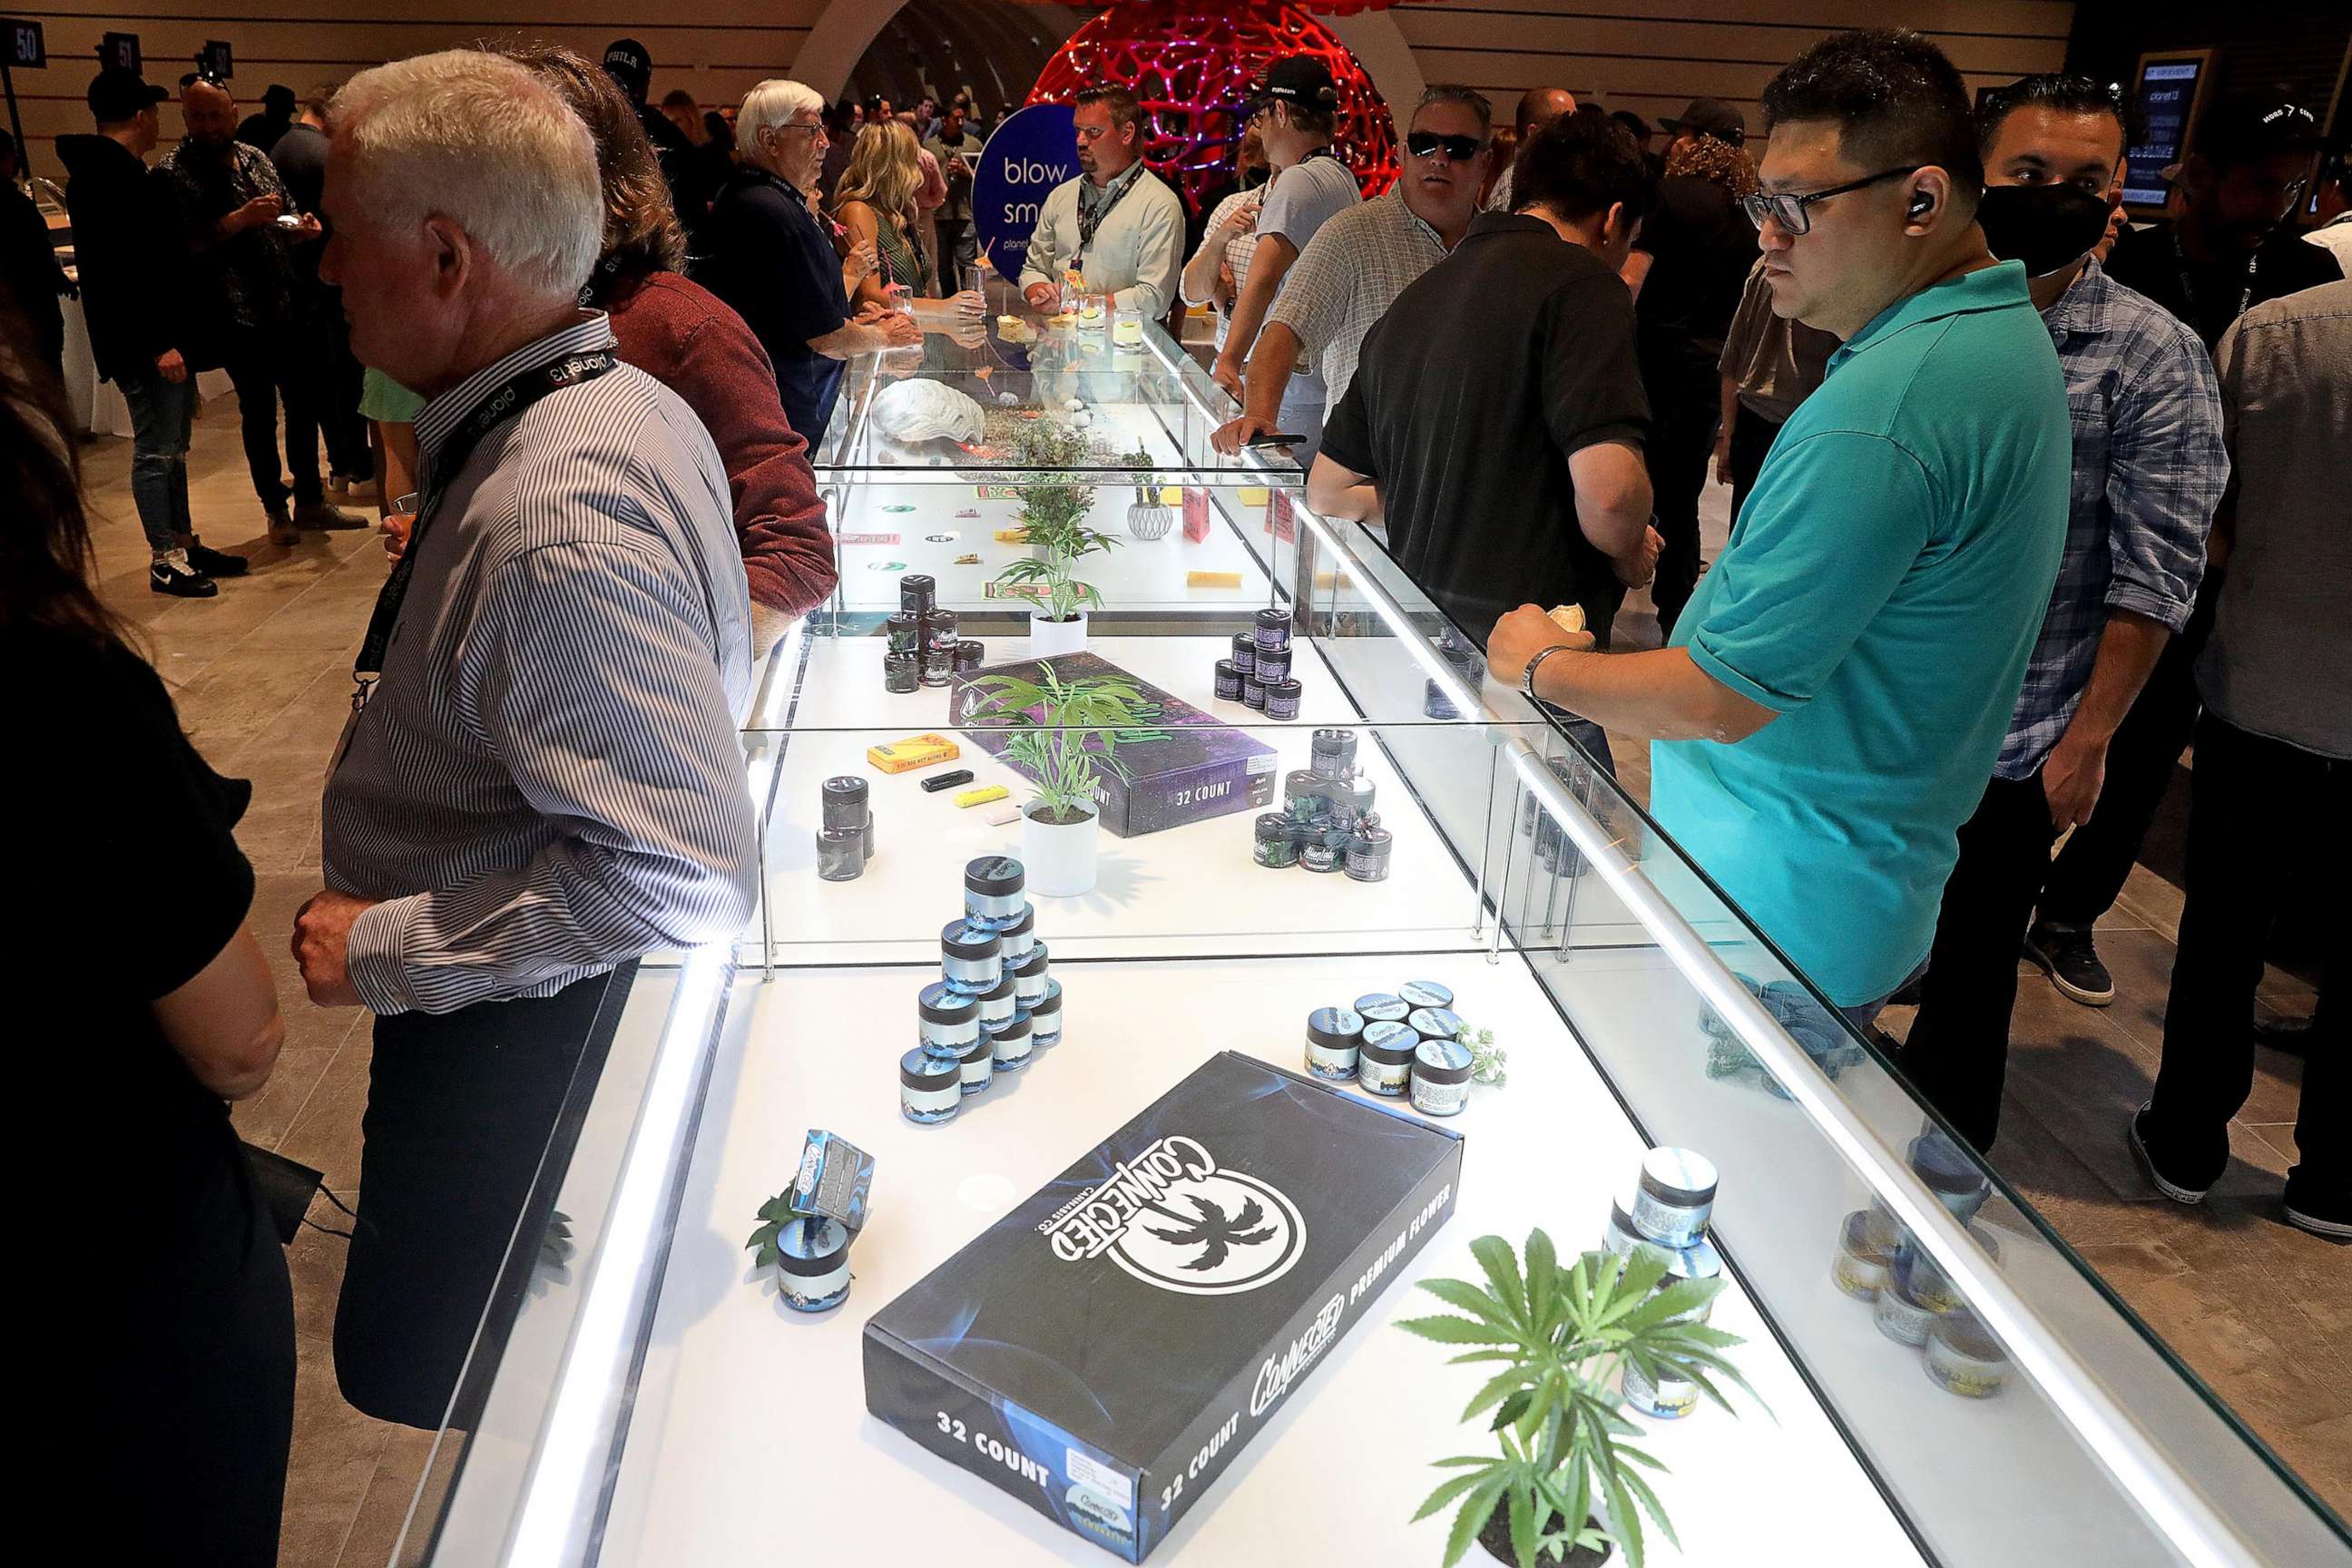 PHOTO: In this June 24, 2021, file photo, people check out a display case with merchandise at a VIP Event at Planet 13, in Santa Ana, Calif.